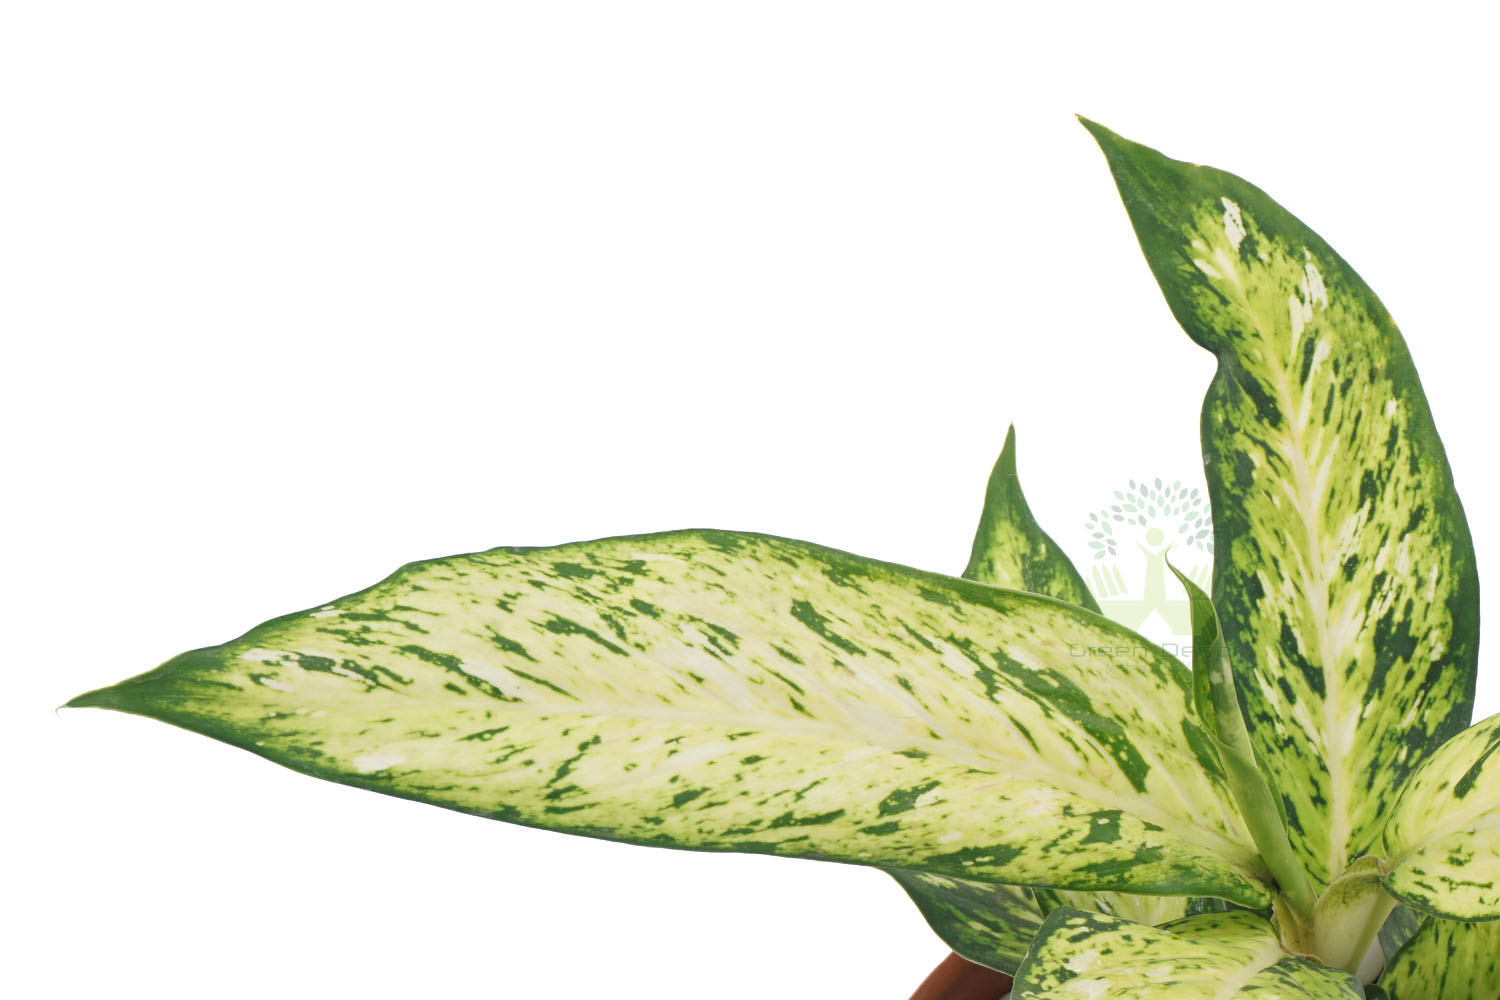 Buy Aglaonema Philipica Plants , White Pots and seeds in Delhi NCR by the best online nursery shop Greendecor.